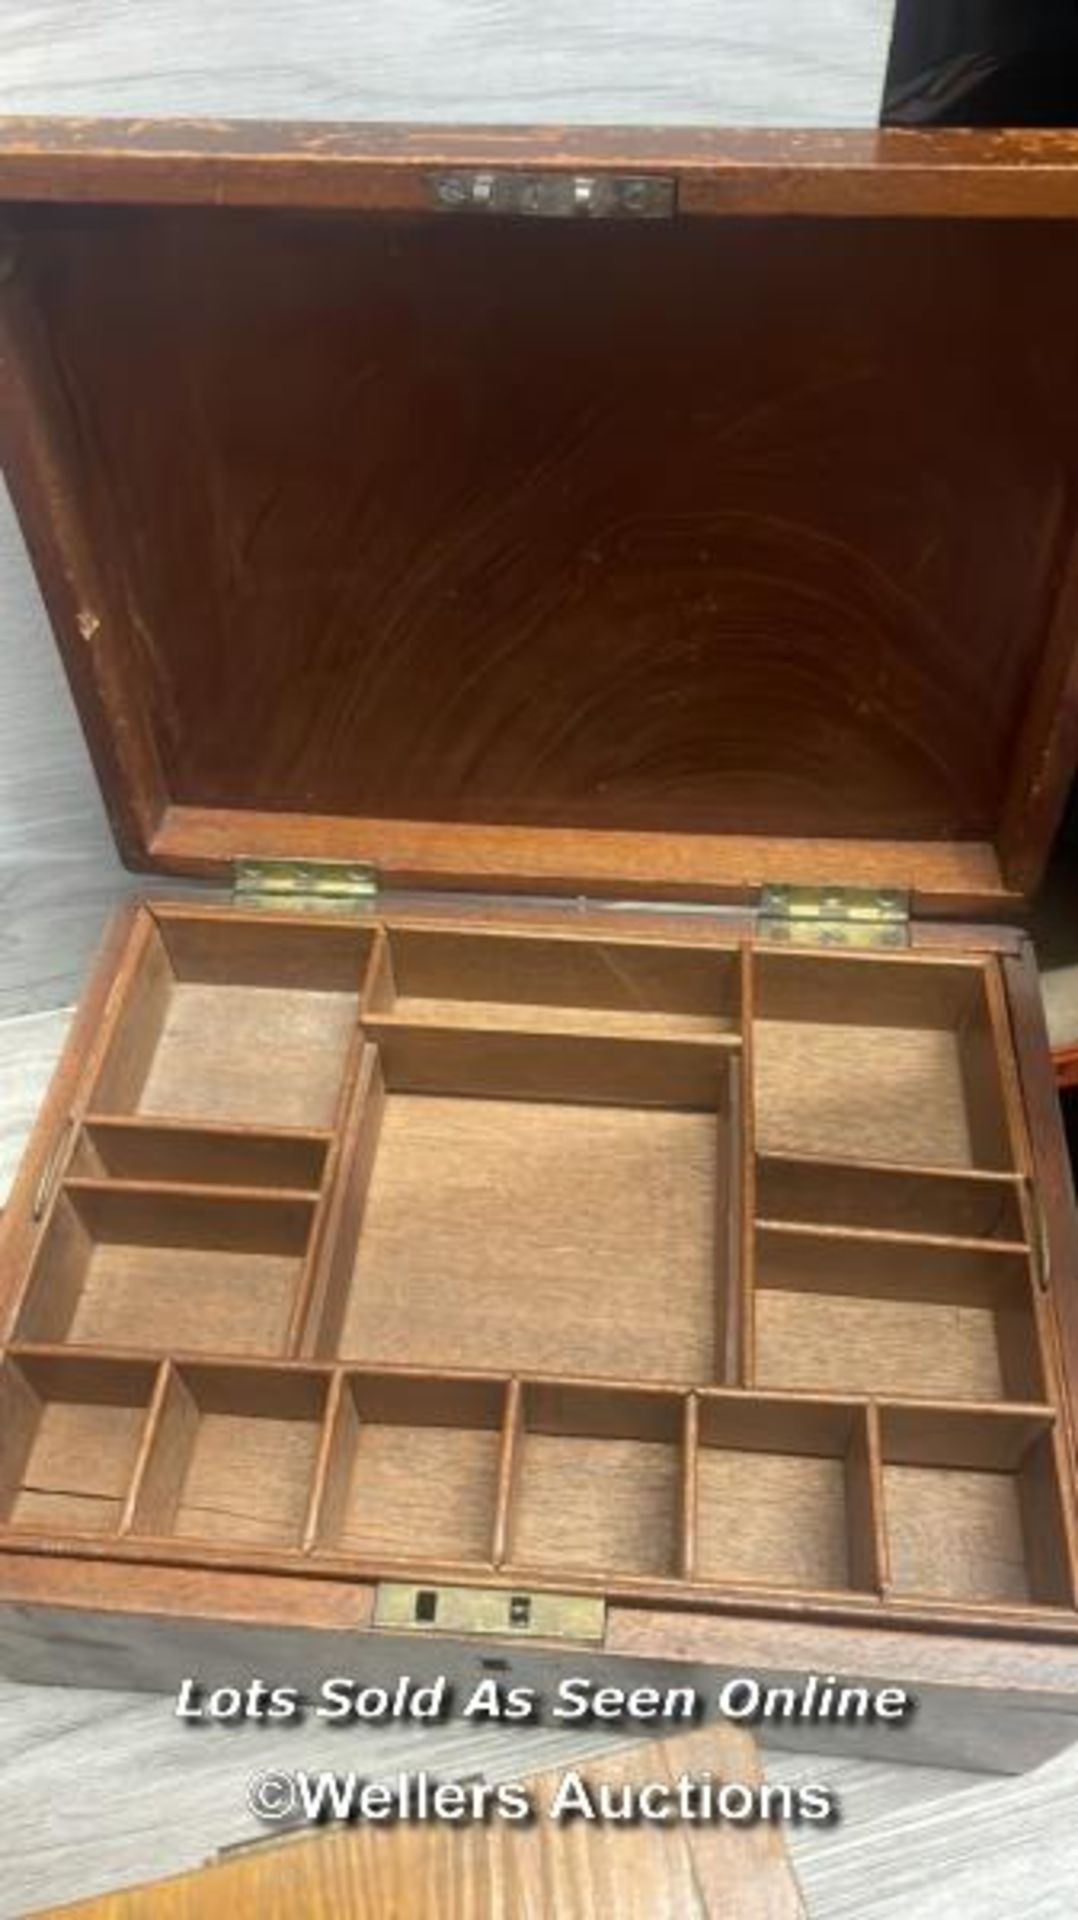 THREE ANTIQUE WOODEN BOXES, THE LARGEST 15CM (H) - Image 3 of 4